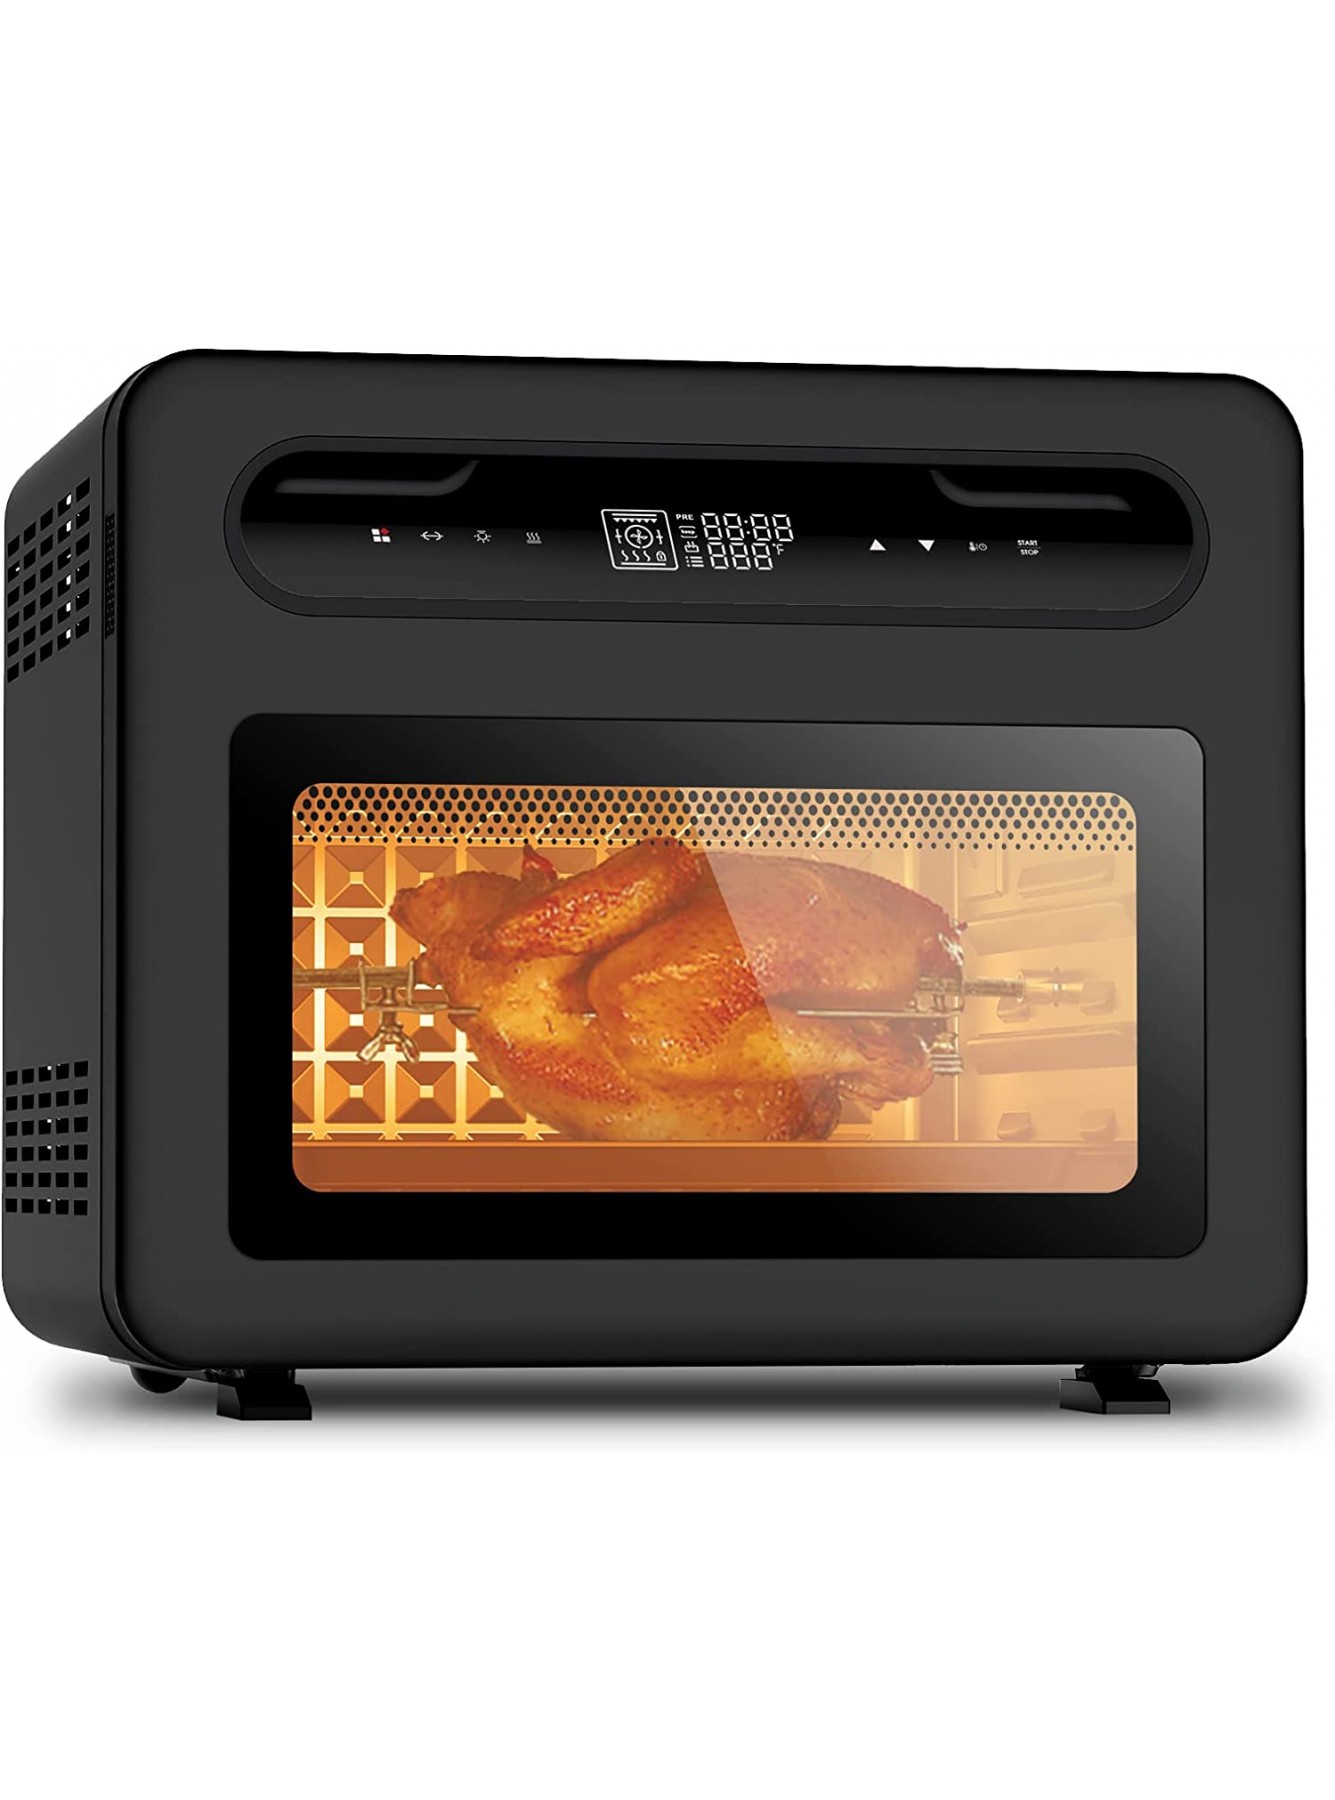 Geek Chef Air Fryer Toaster Oven 50-in-1 Steam Countertop Convection Oven 26QT Extra Large Capacity Fit 12 Pizza 6 Slices Toast Rotisserie and Dehydrator Pizza Steam Double-layer Glass Door 6 Accessories Include ETL Certified Black Stainless Steel B0